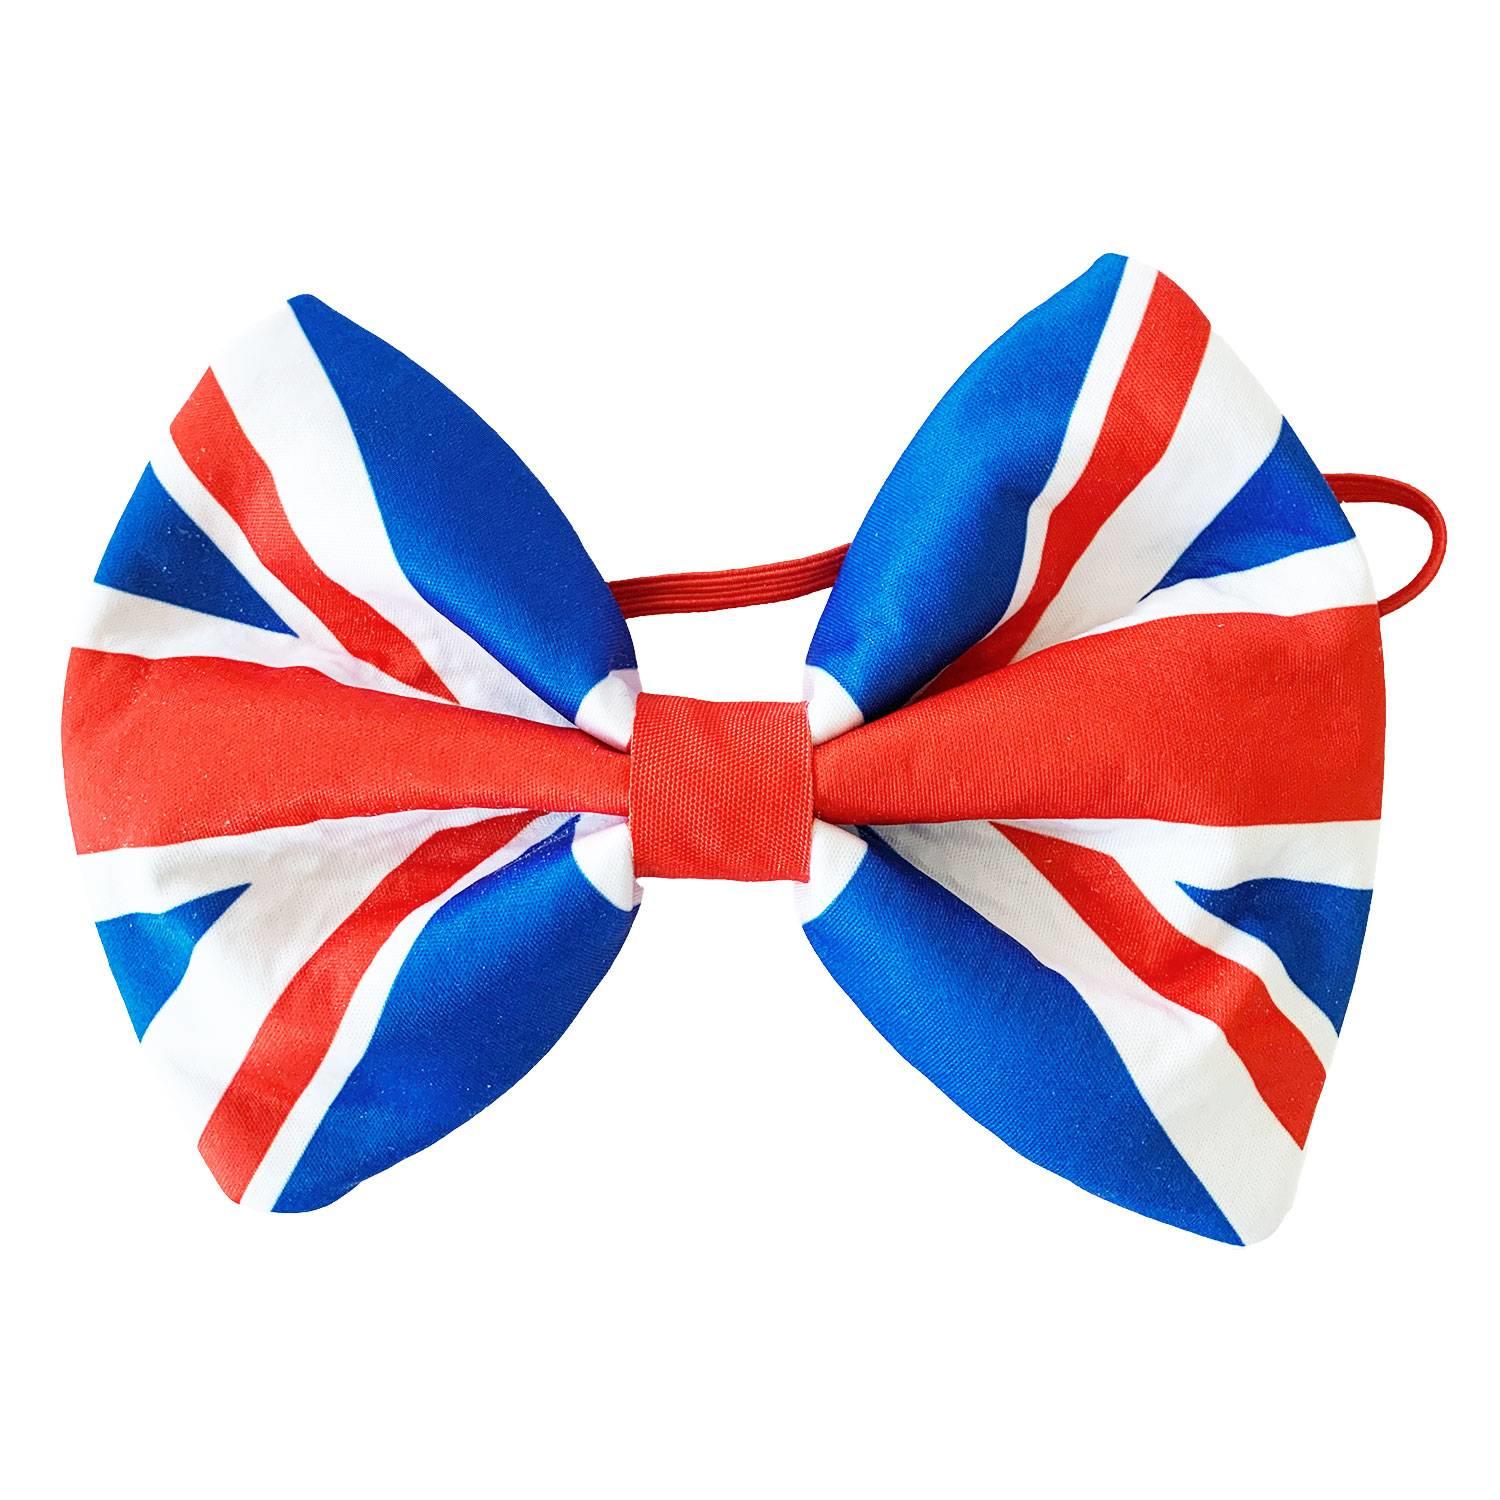 UNION JACK SEQUIN BOW TIE QUEENS BIRTHDAY DECORATION,WORLD CUP,OLYMPICS 